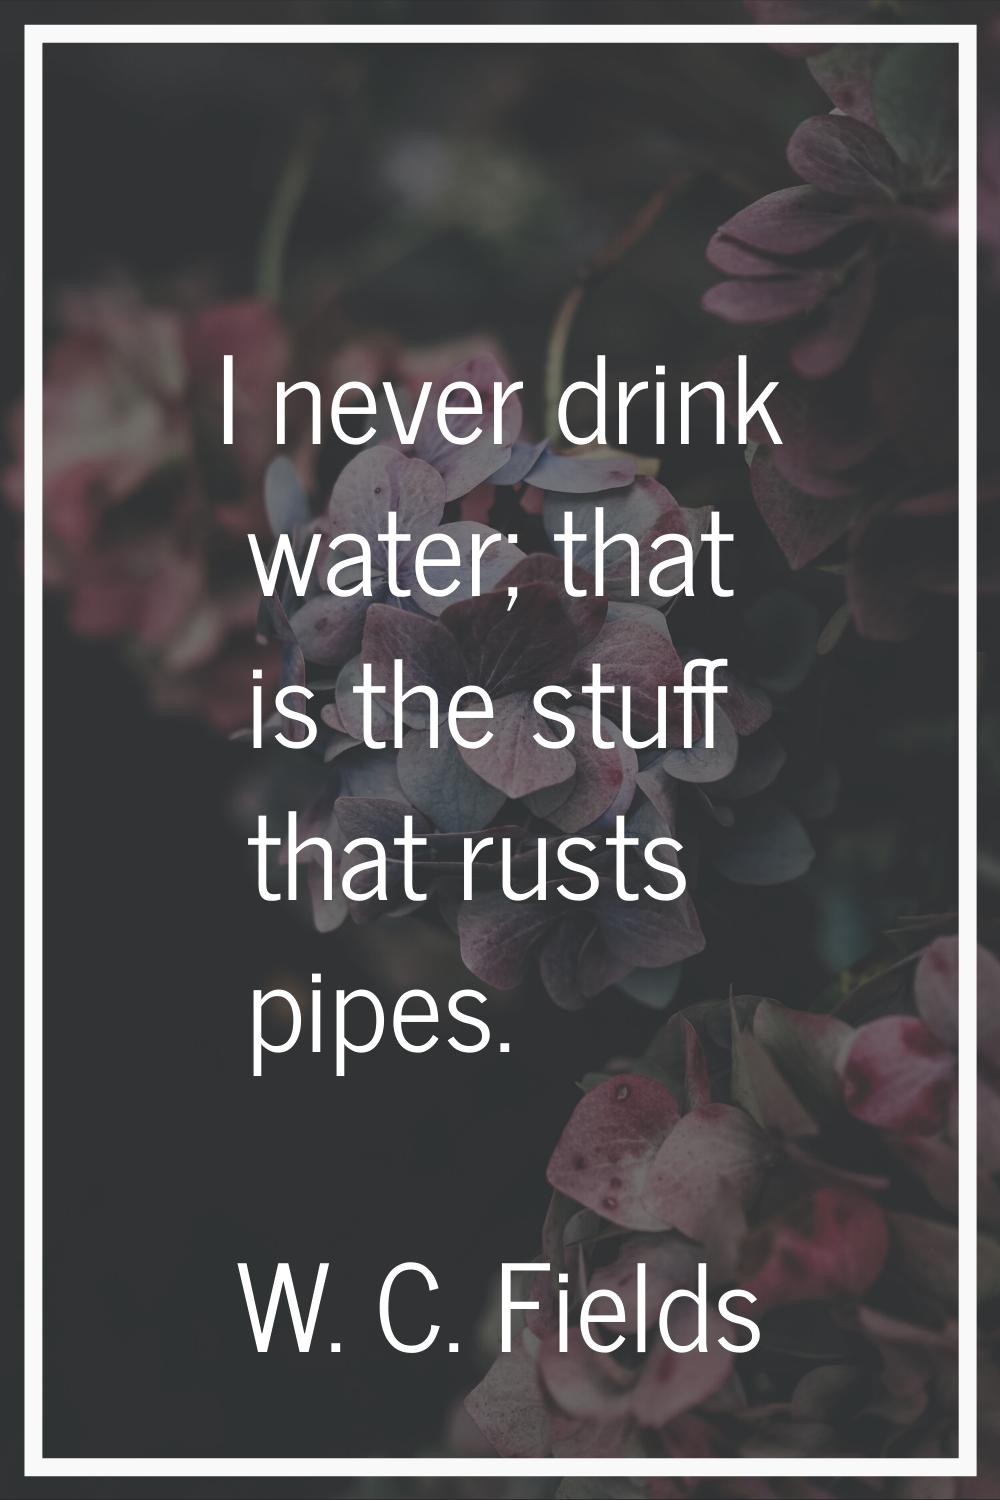 I never drink water; that is the stuff that rusts pipes.